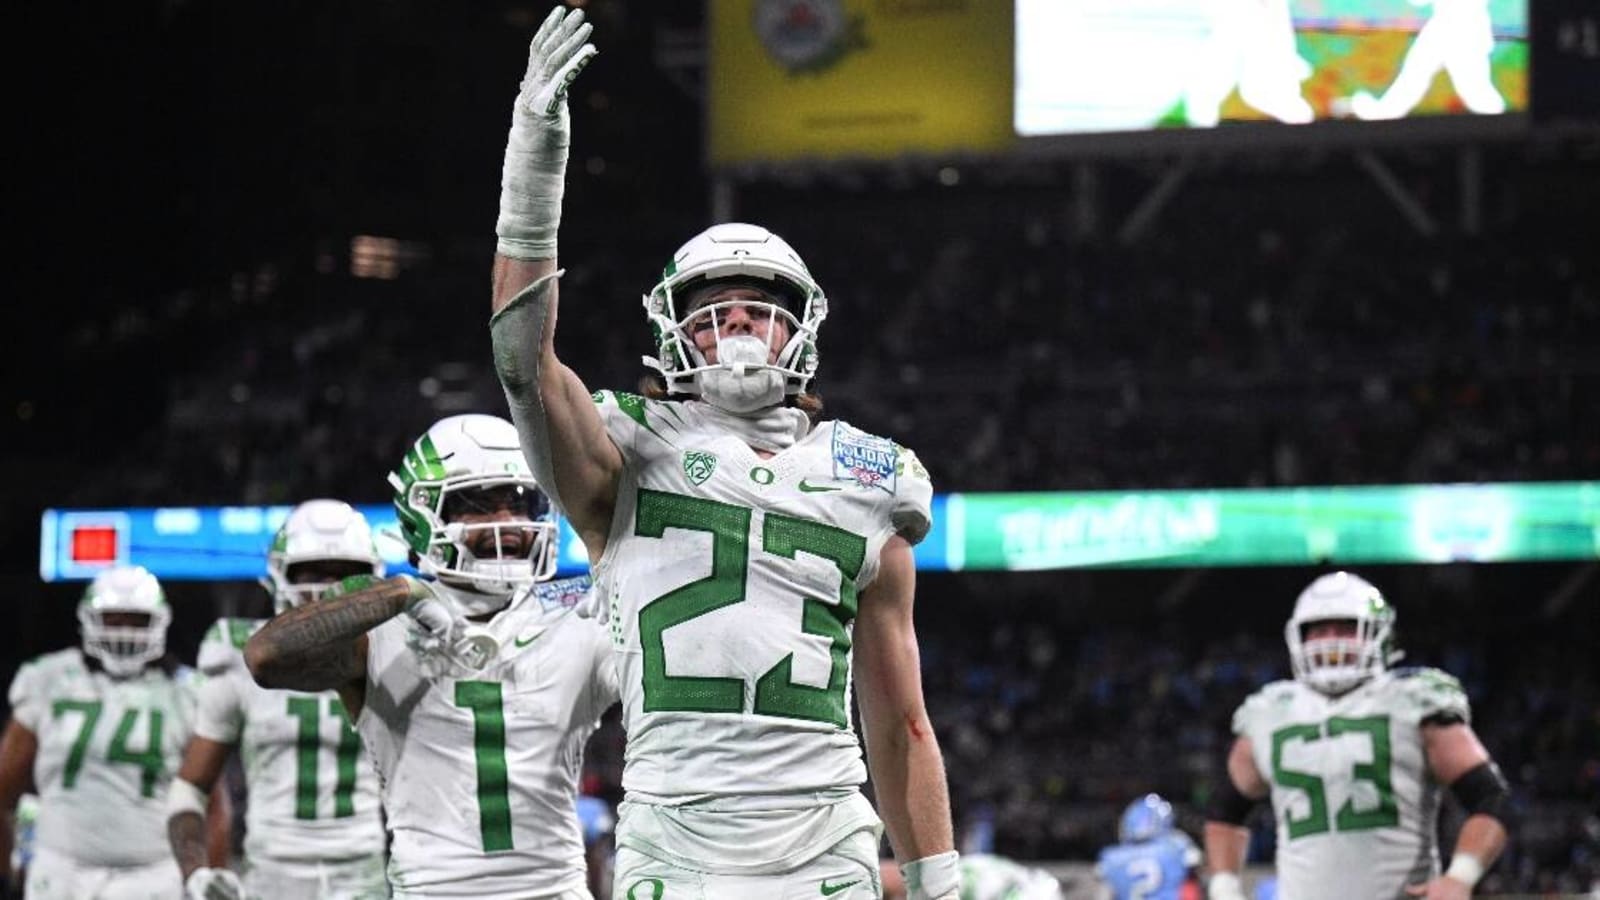 Chiefs sign former Oregon wide receiver Chase Cota to practice squad, per agent